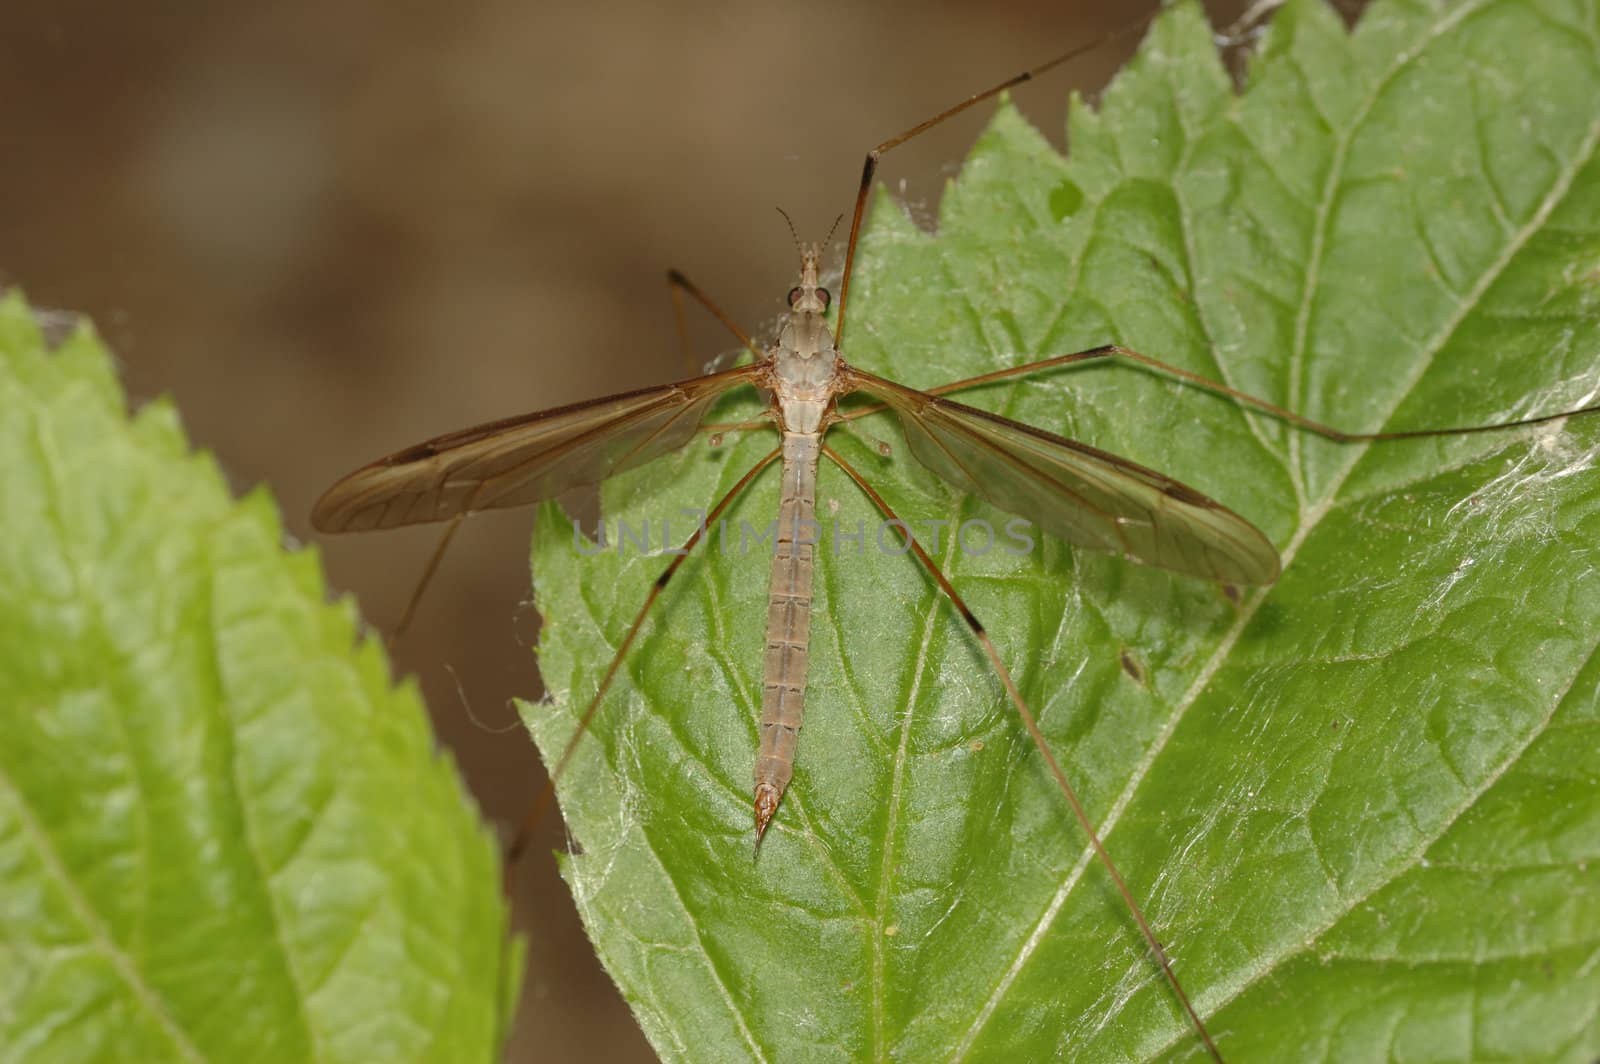 A crane fly perched on a plant leaf.